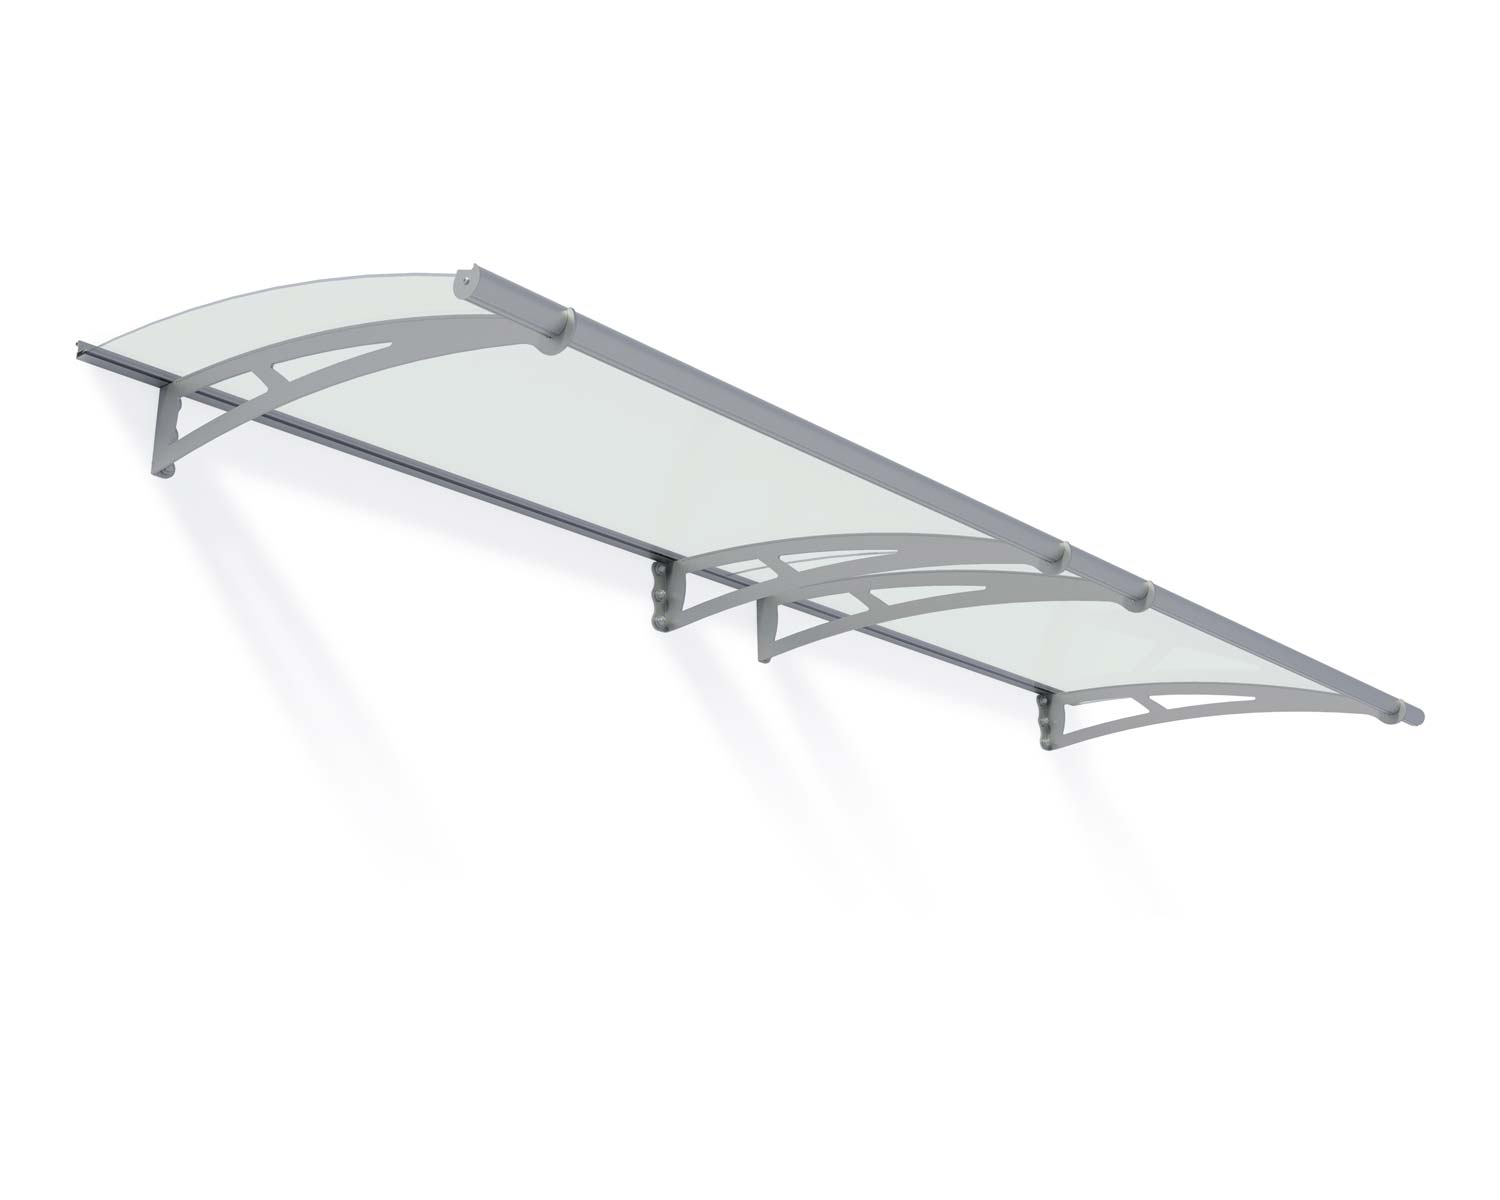 Door Awning Capella 3 ft. x 10 ft Silver Structure &amp; Frost Glazing